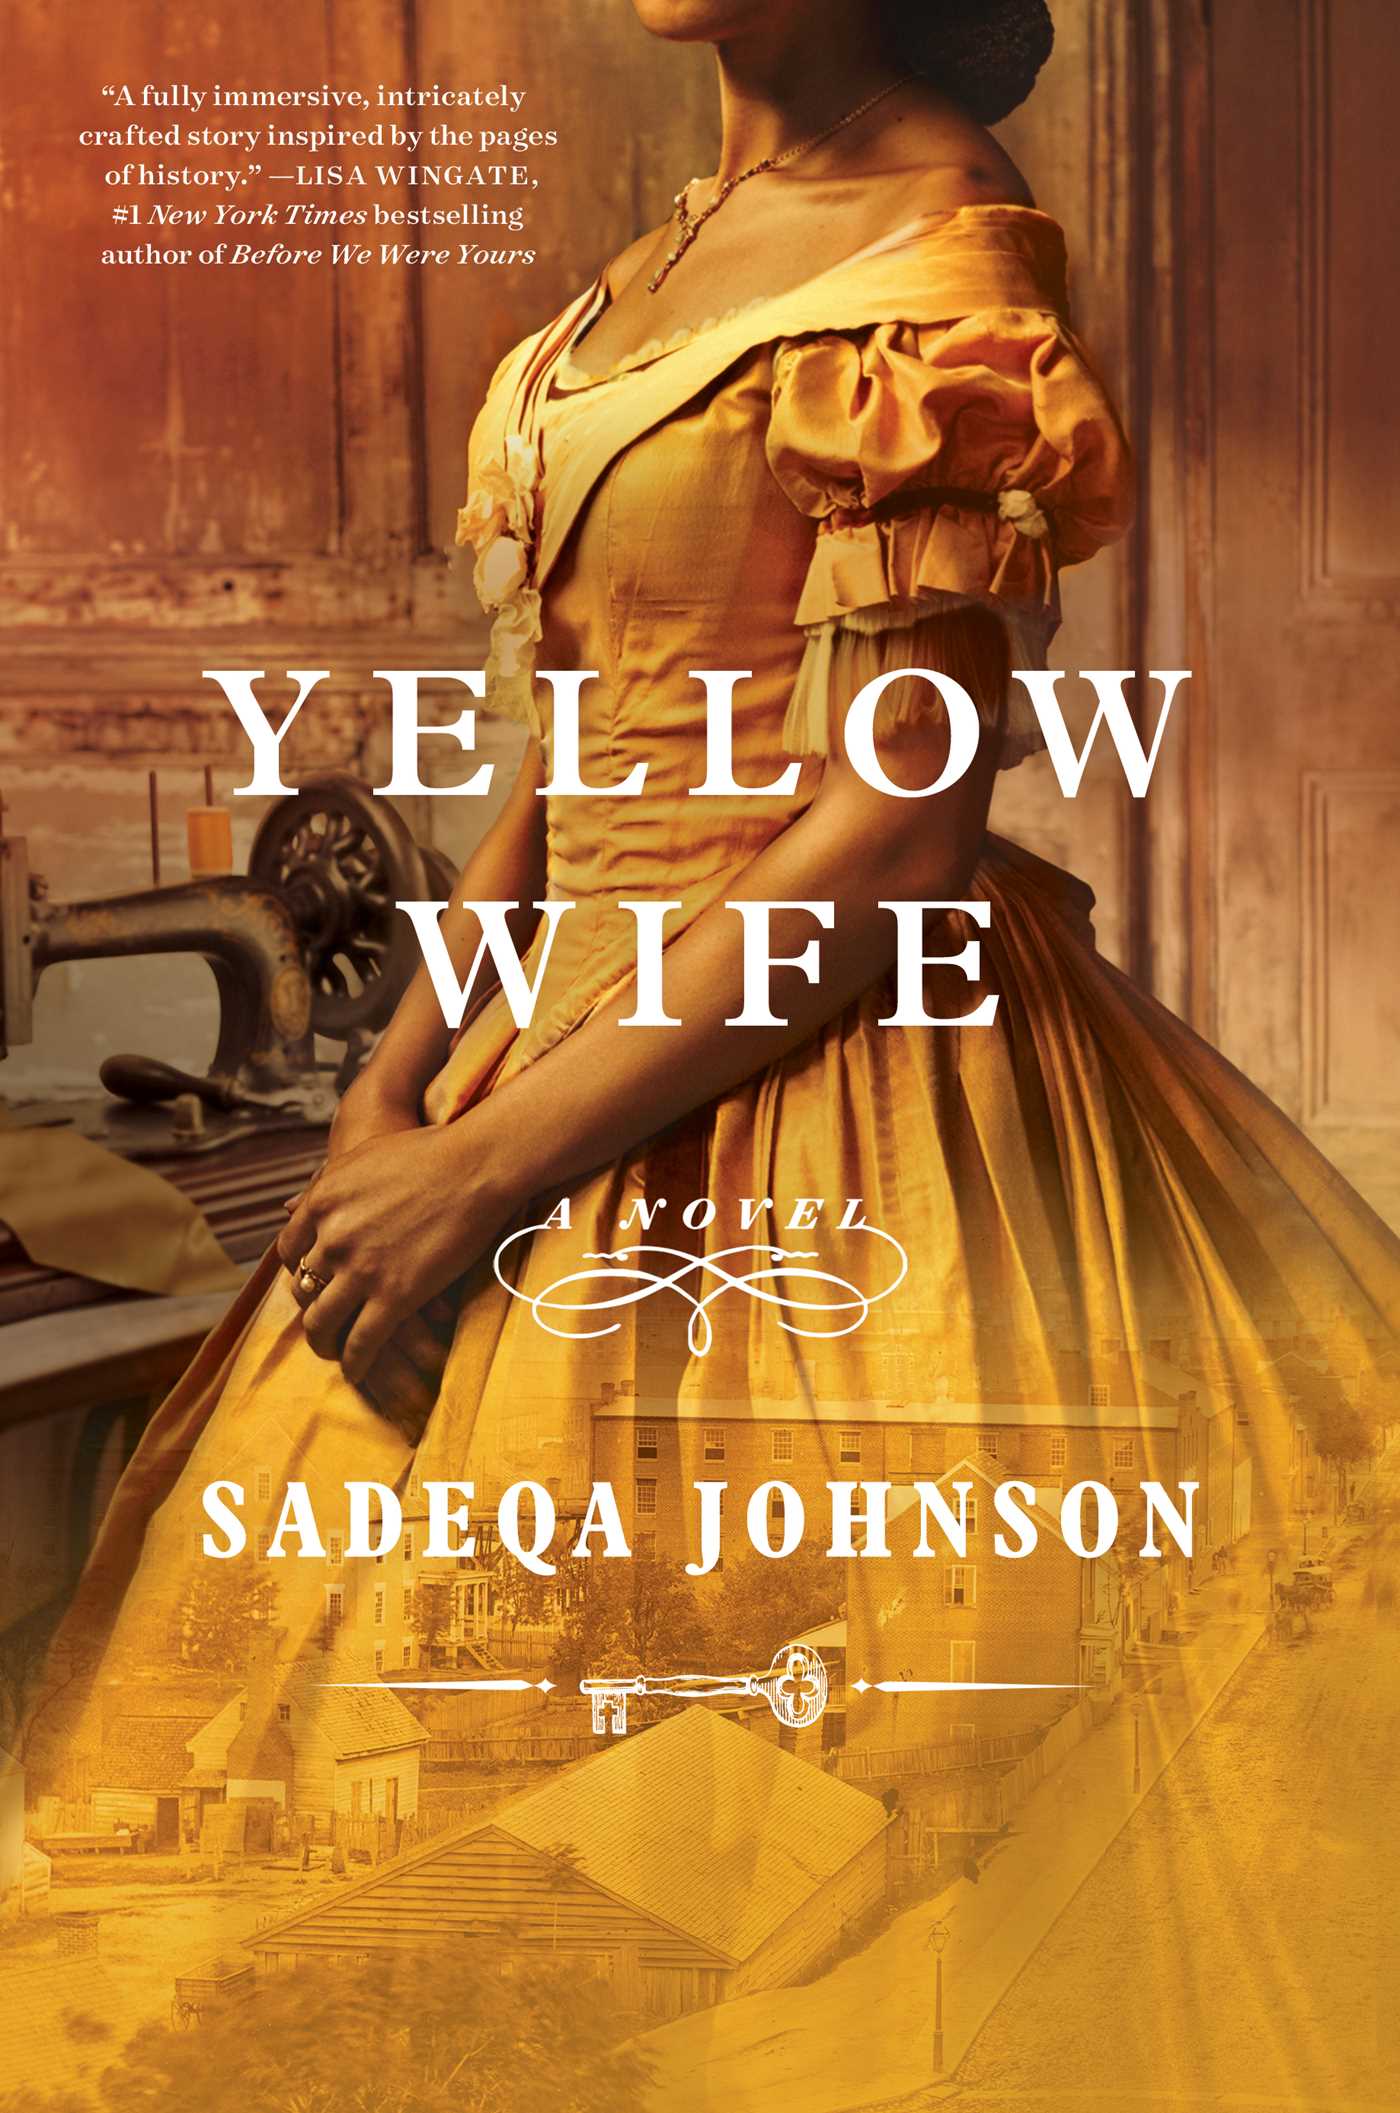 Yellow Wife by Sadeqa Johnson book cover